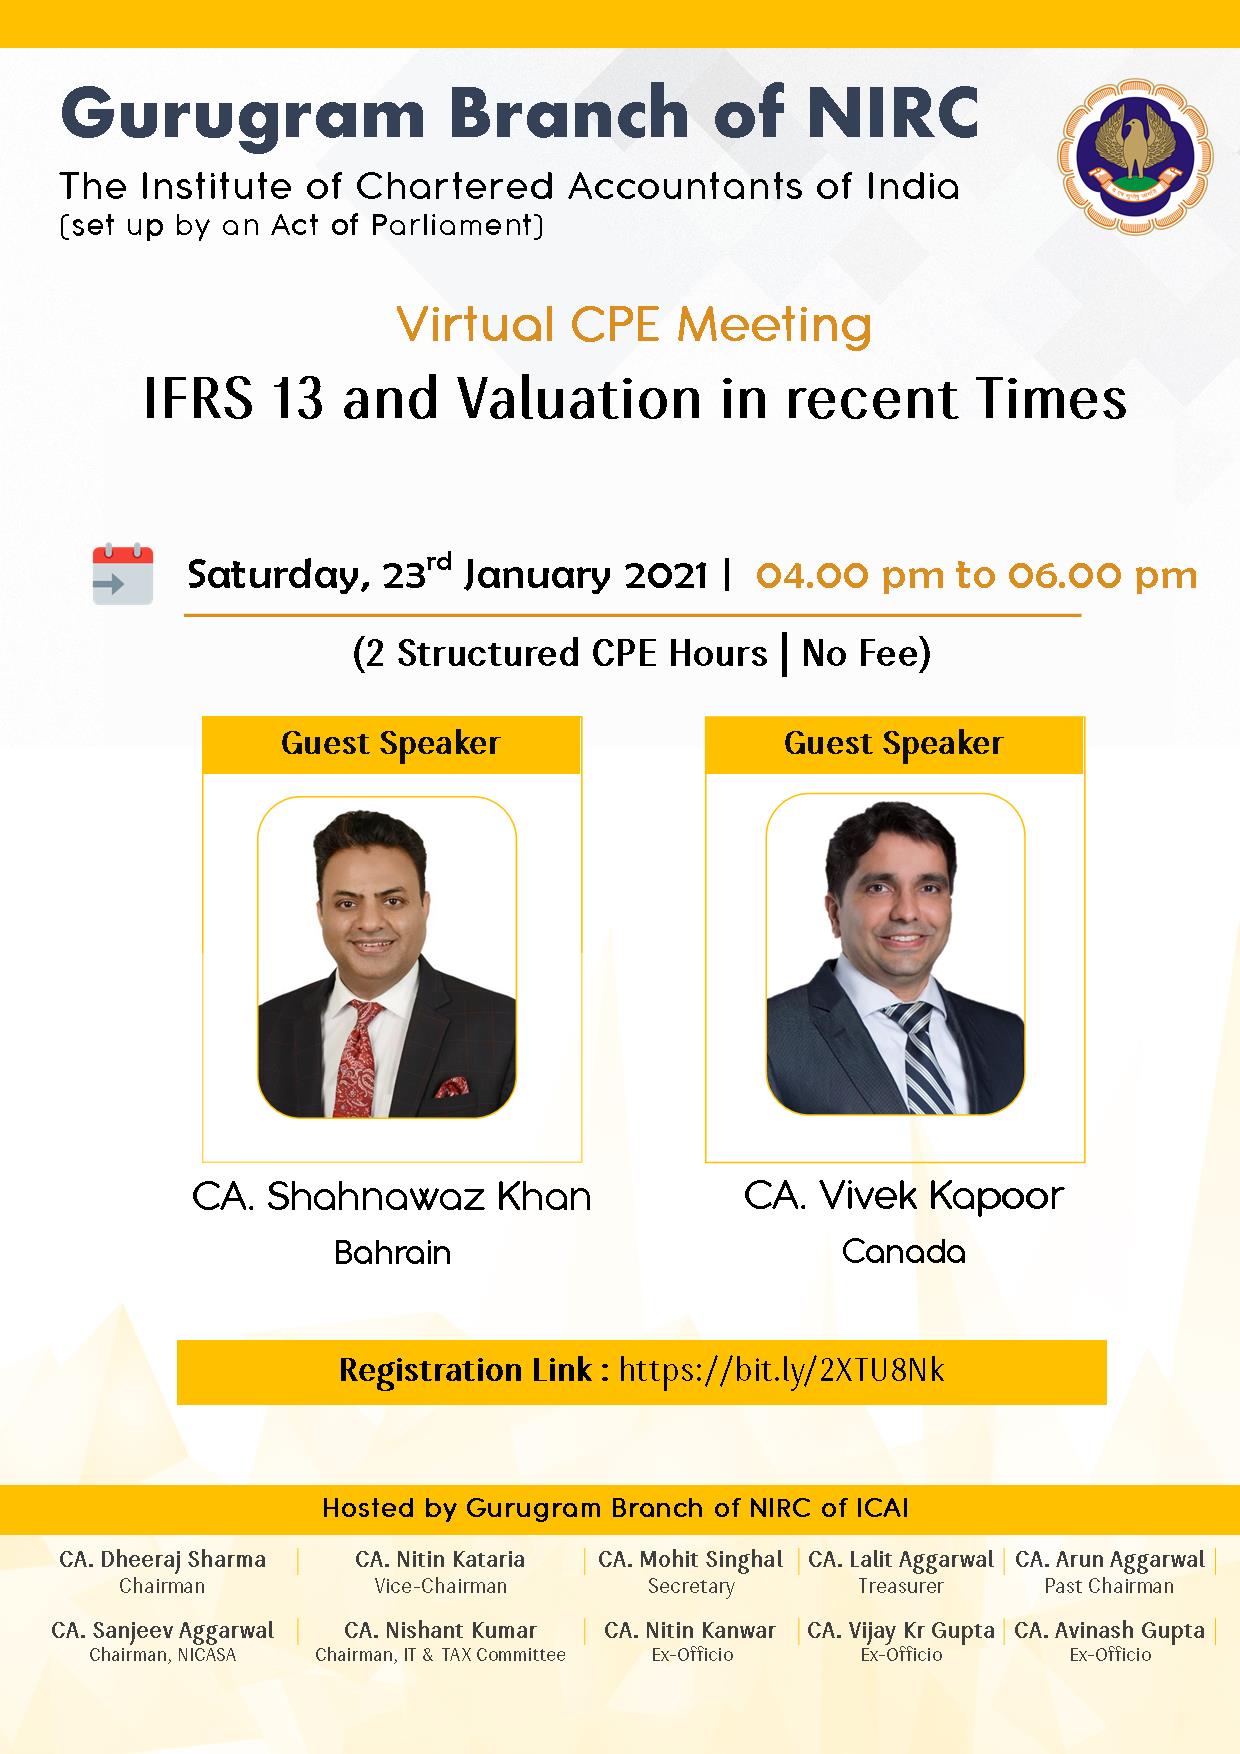 Virtual CPE Meeting on IFRS 13 and Valuation in recent Times